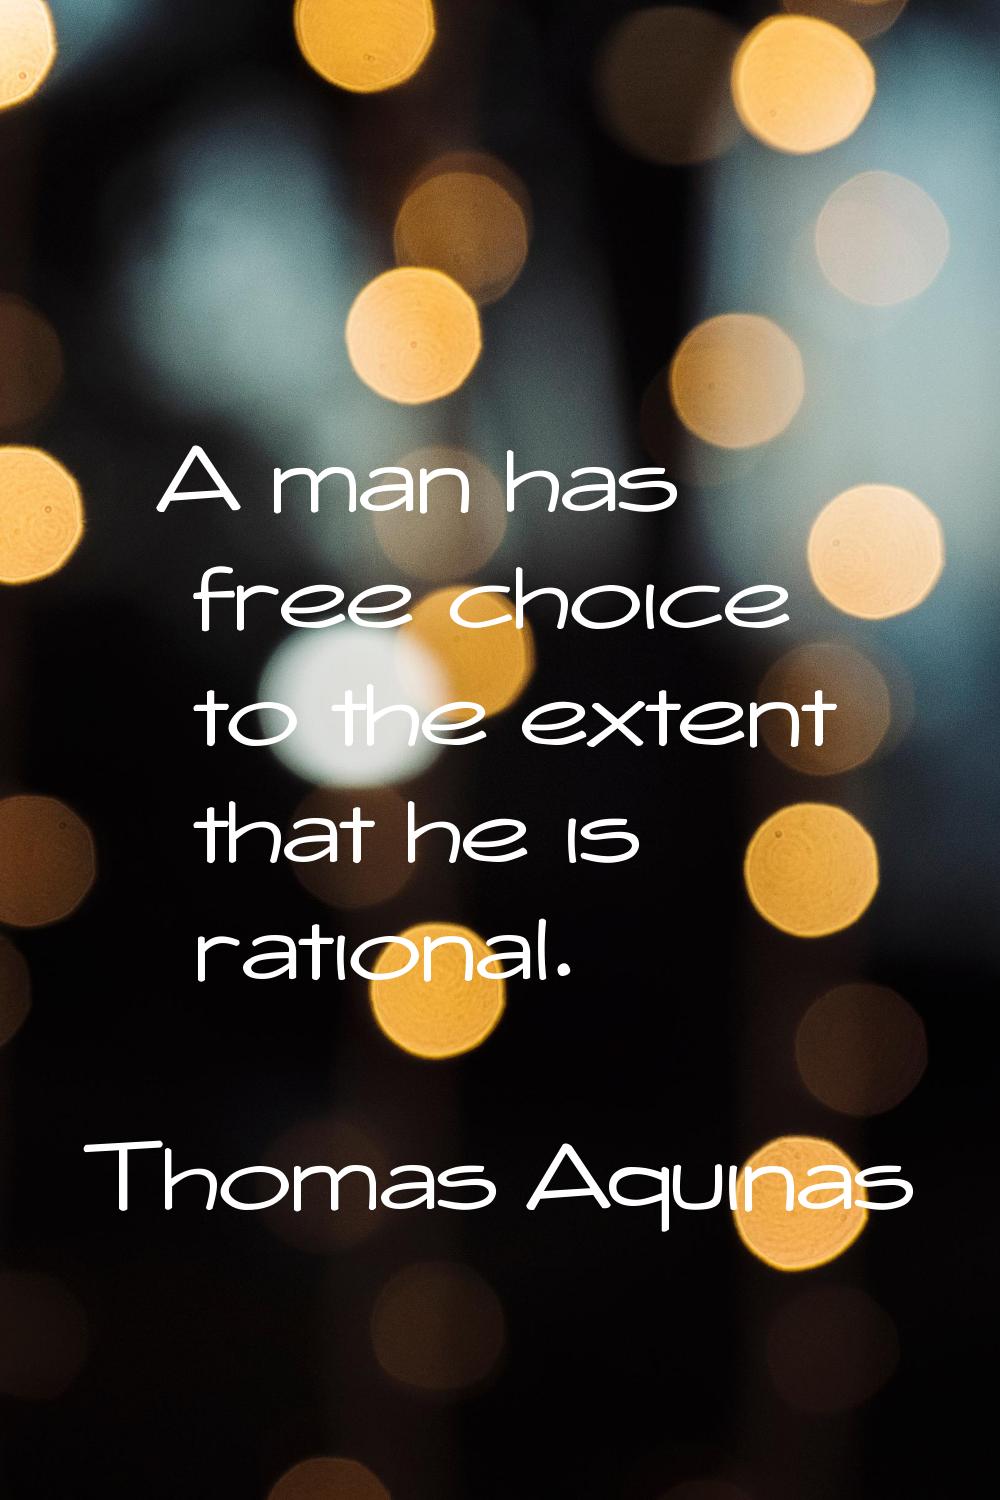 A man has free choice to the extent that he is rational.